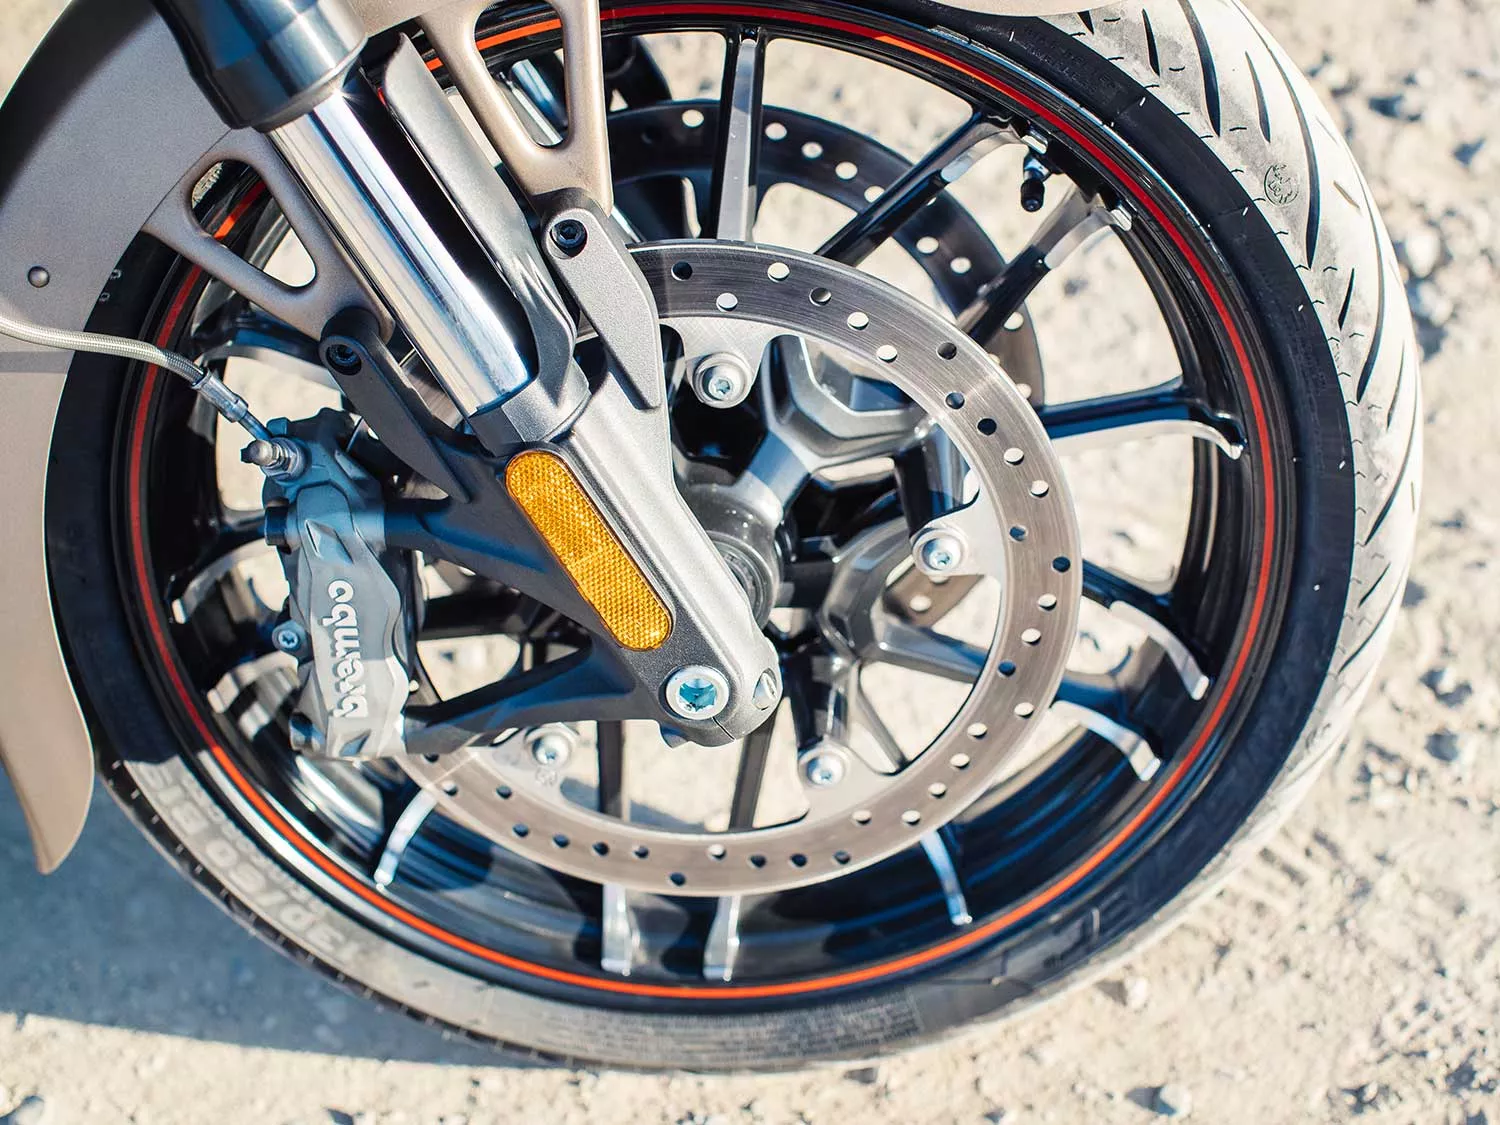 The 320mm disc brakes with radially mounted Brembo calipers stop the Challenger with ease.